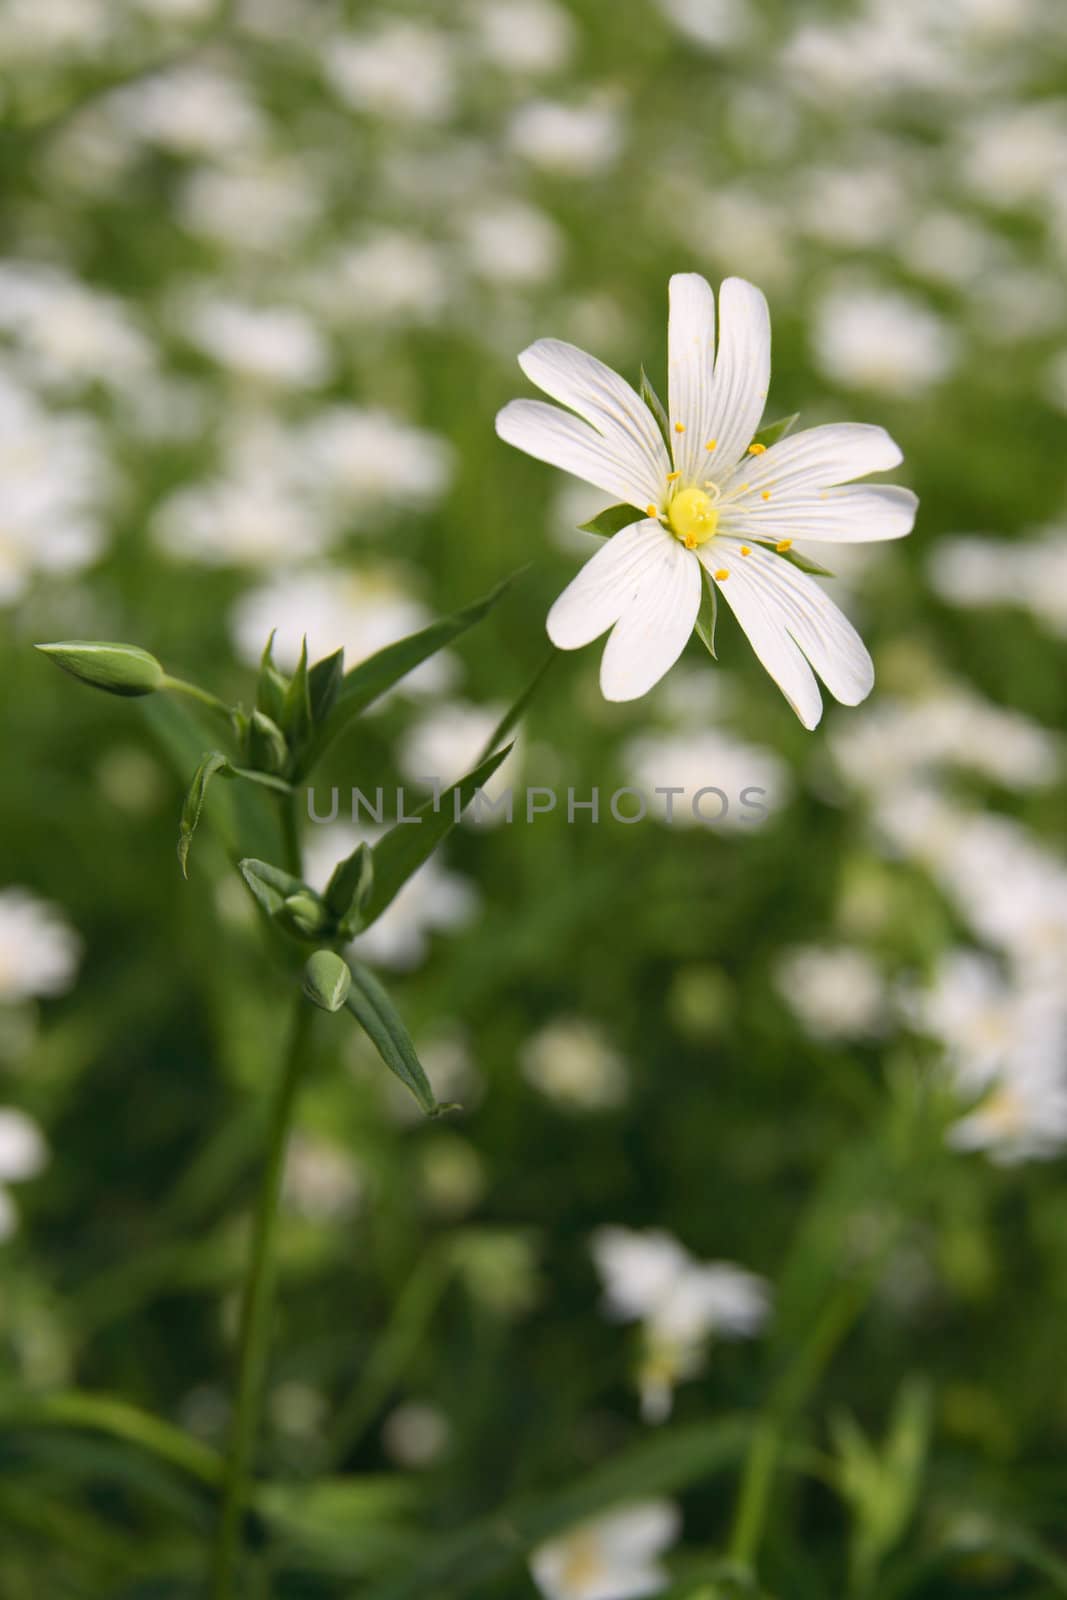 Stellaria holostea, small spring flower in the country side.